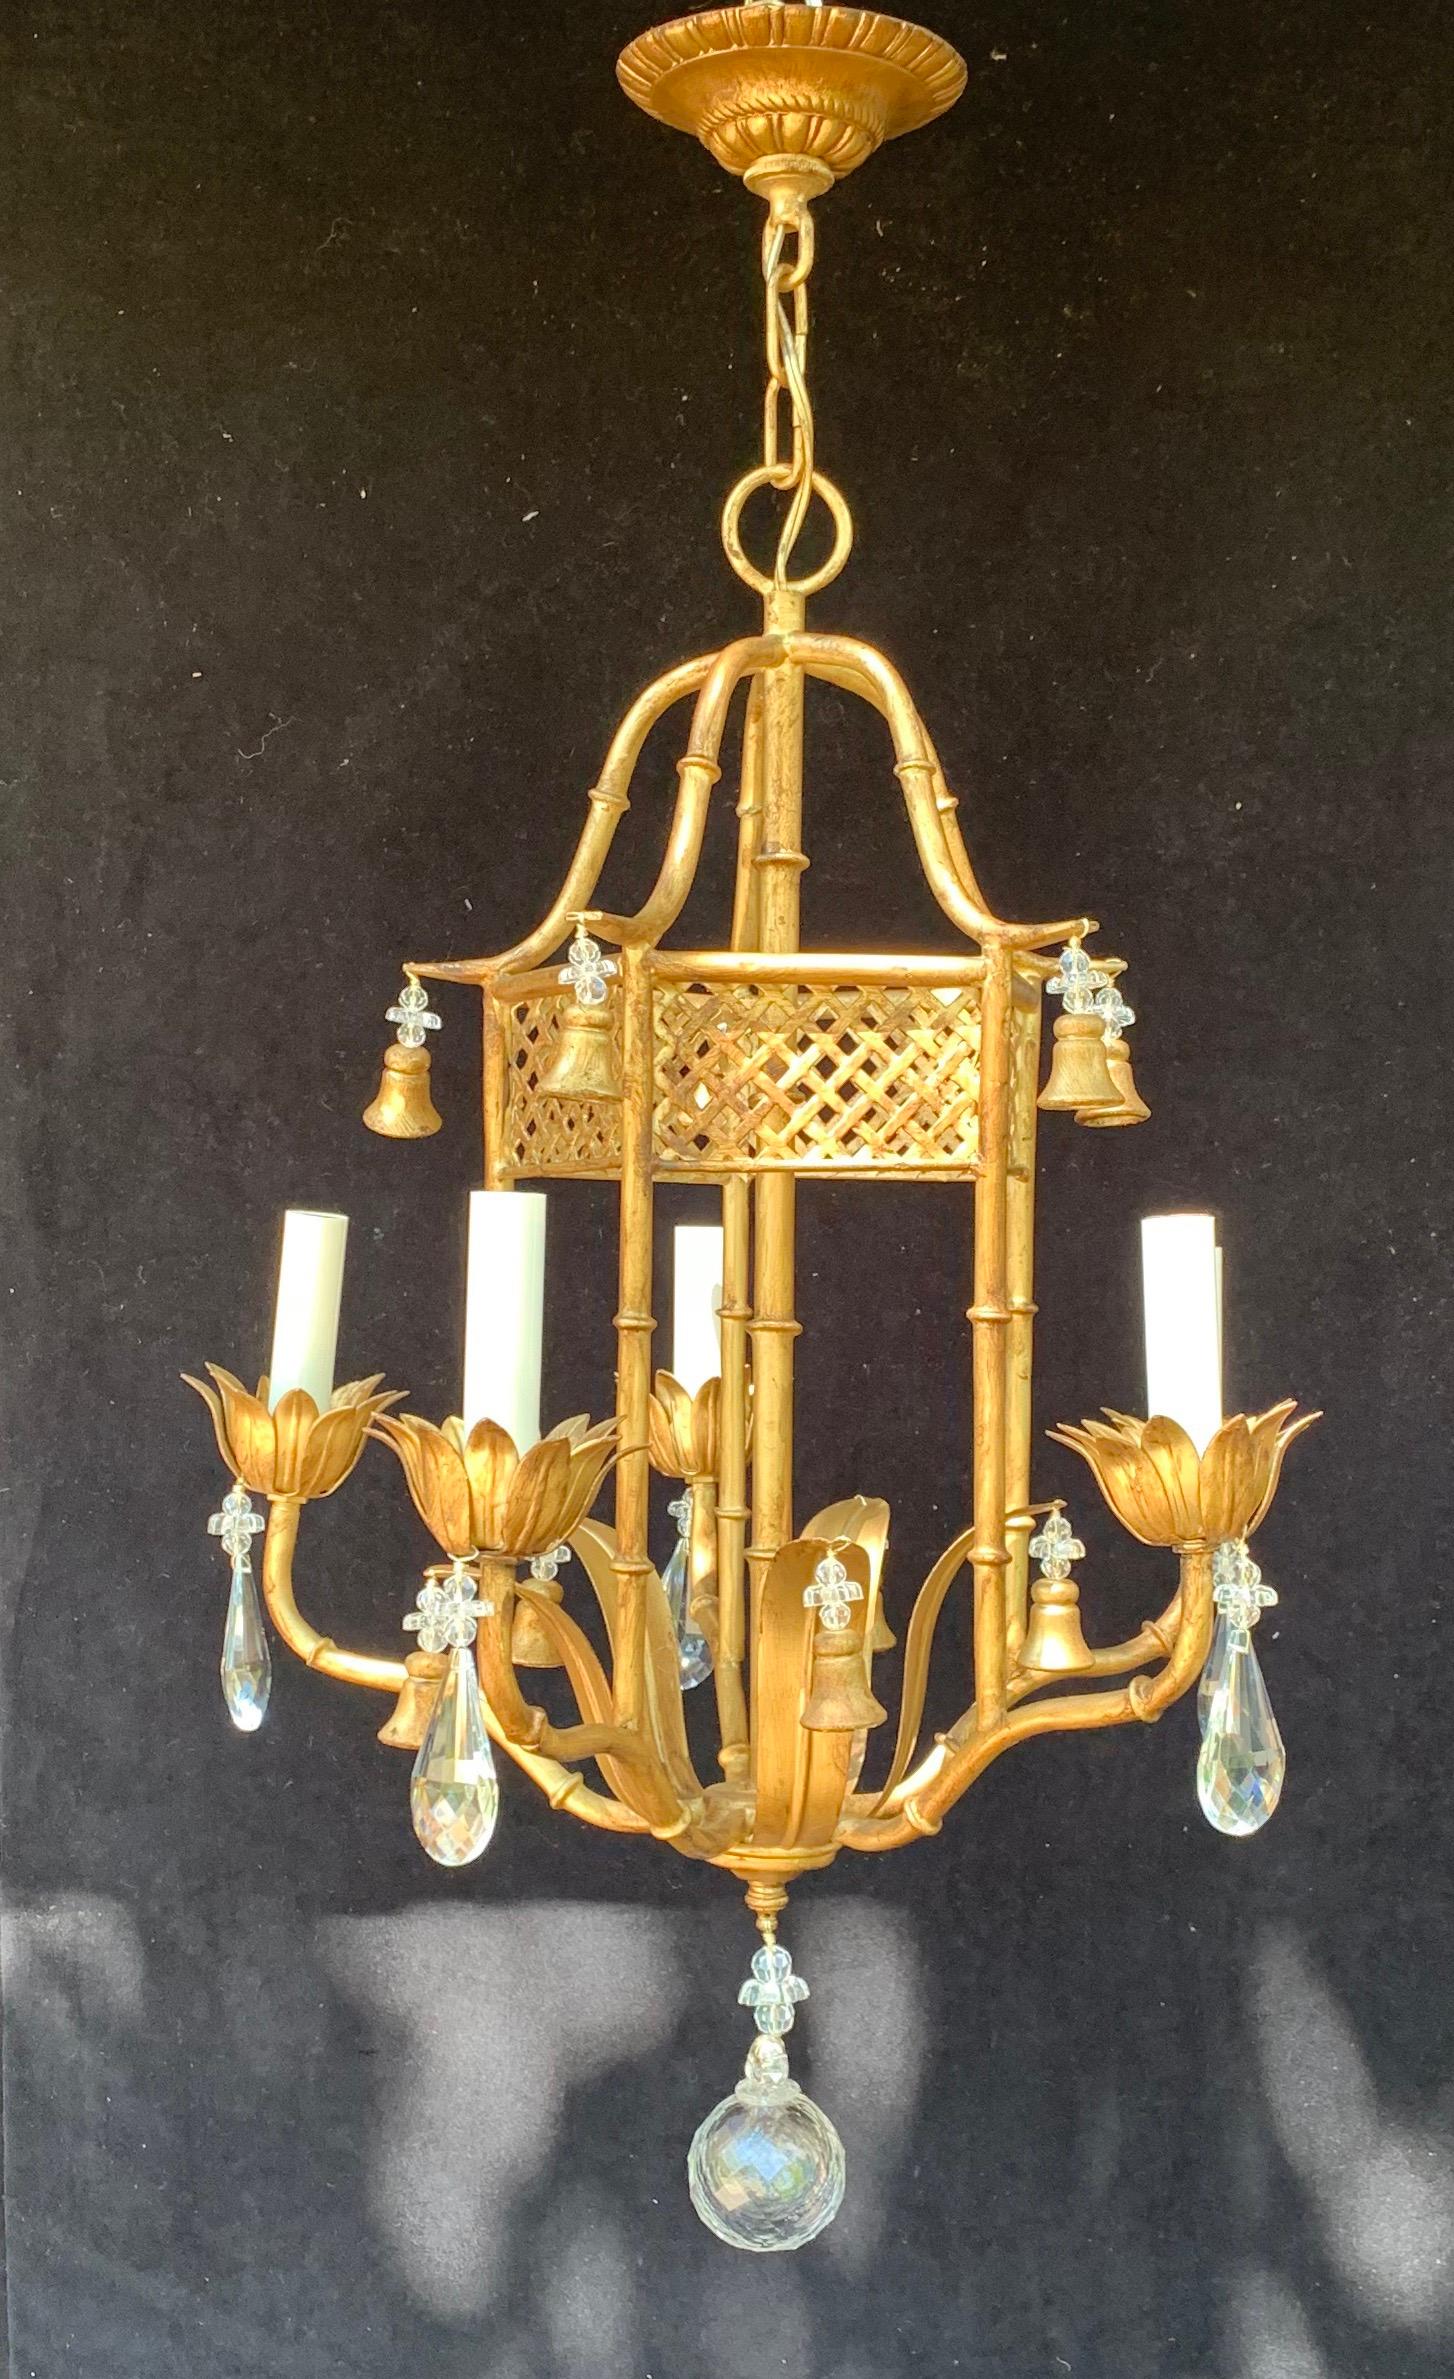 A wonderful French Baguès style tole gold giltwood bells crystal bead flower pagoda chinoiserie 5 candelabra light chandelier.